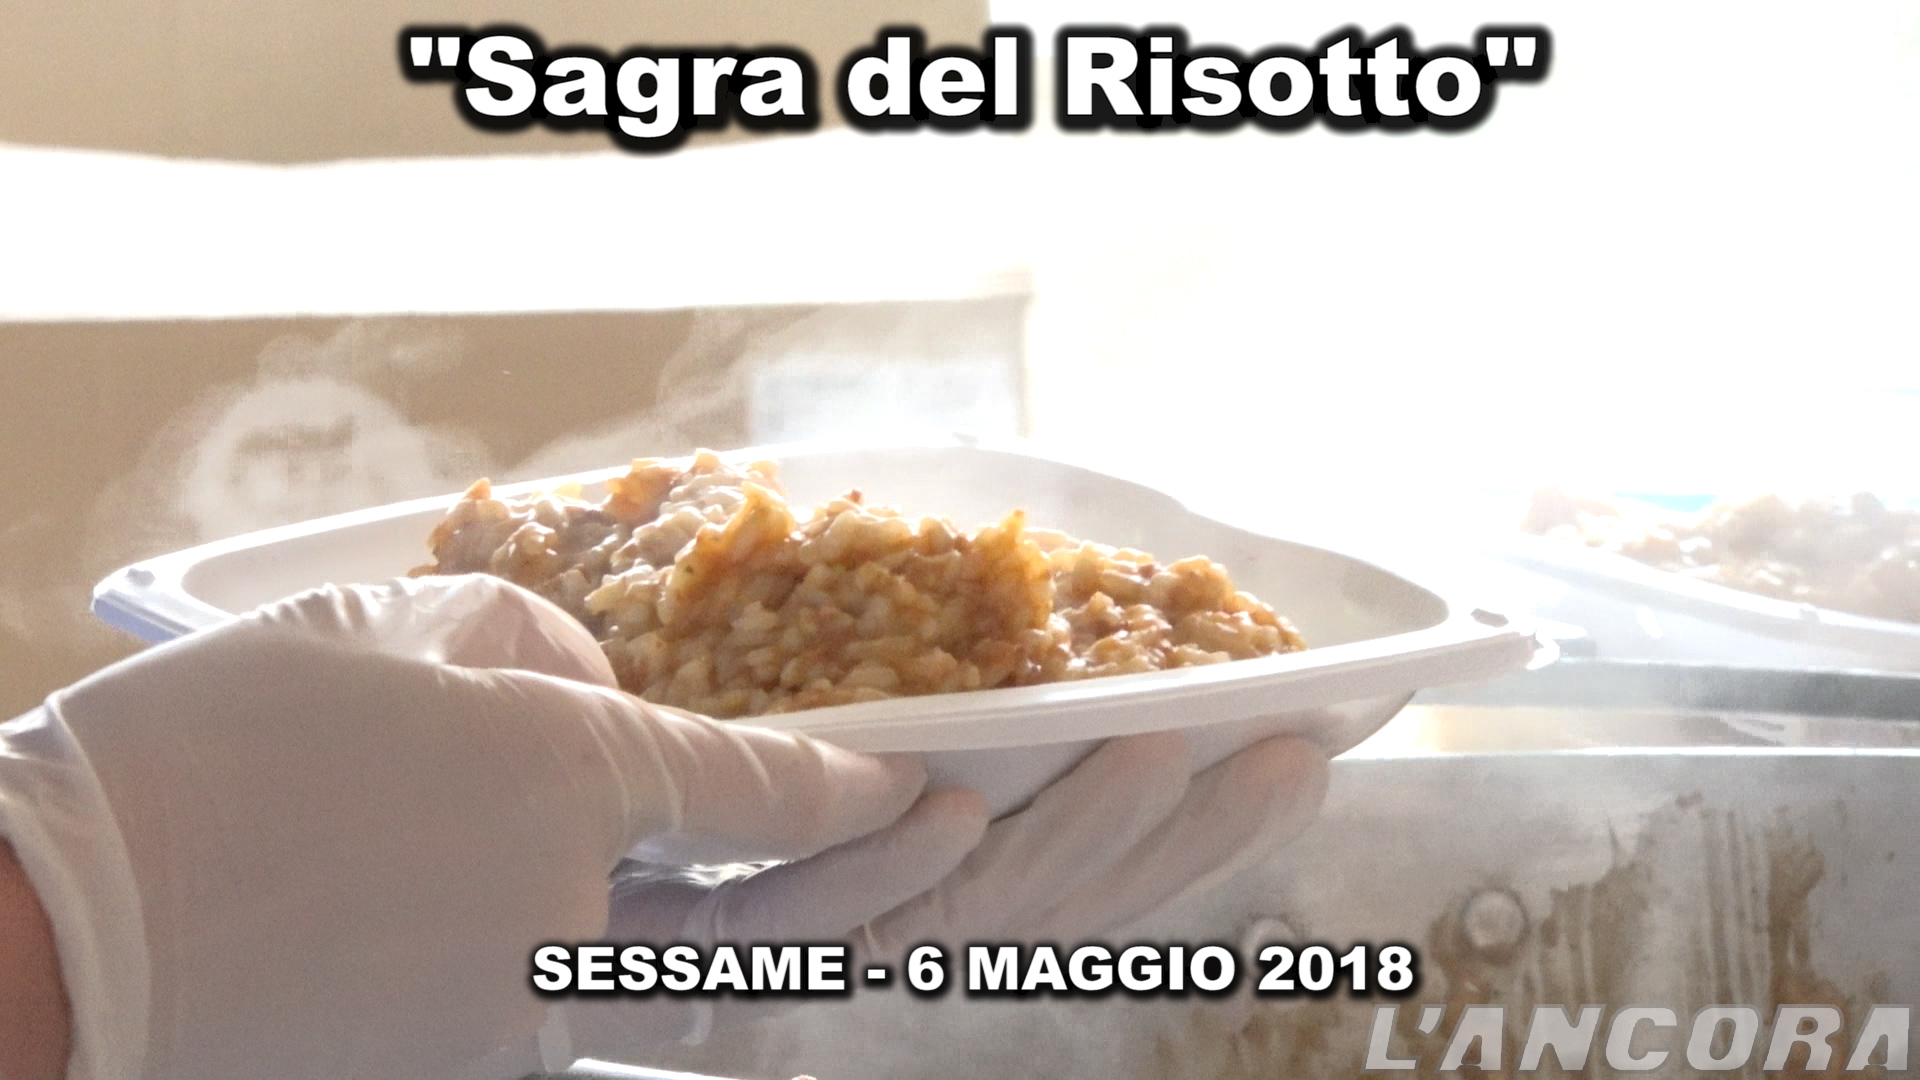 video - 2018-05-06_sessame_risotto